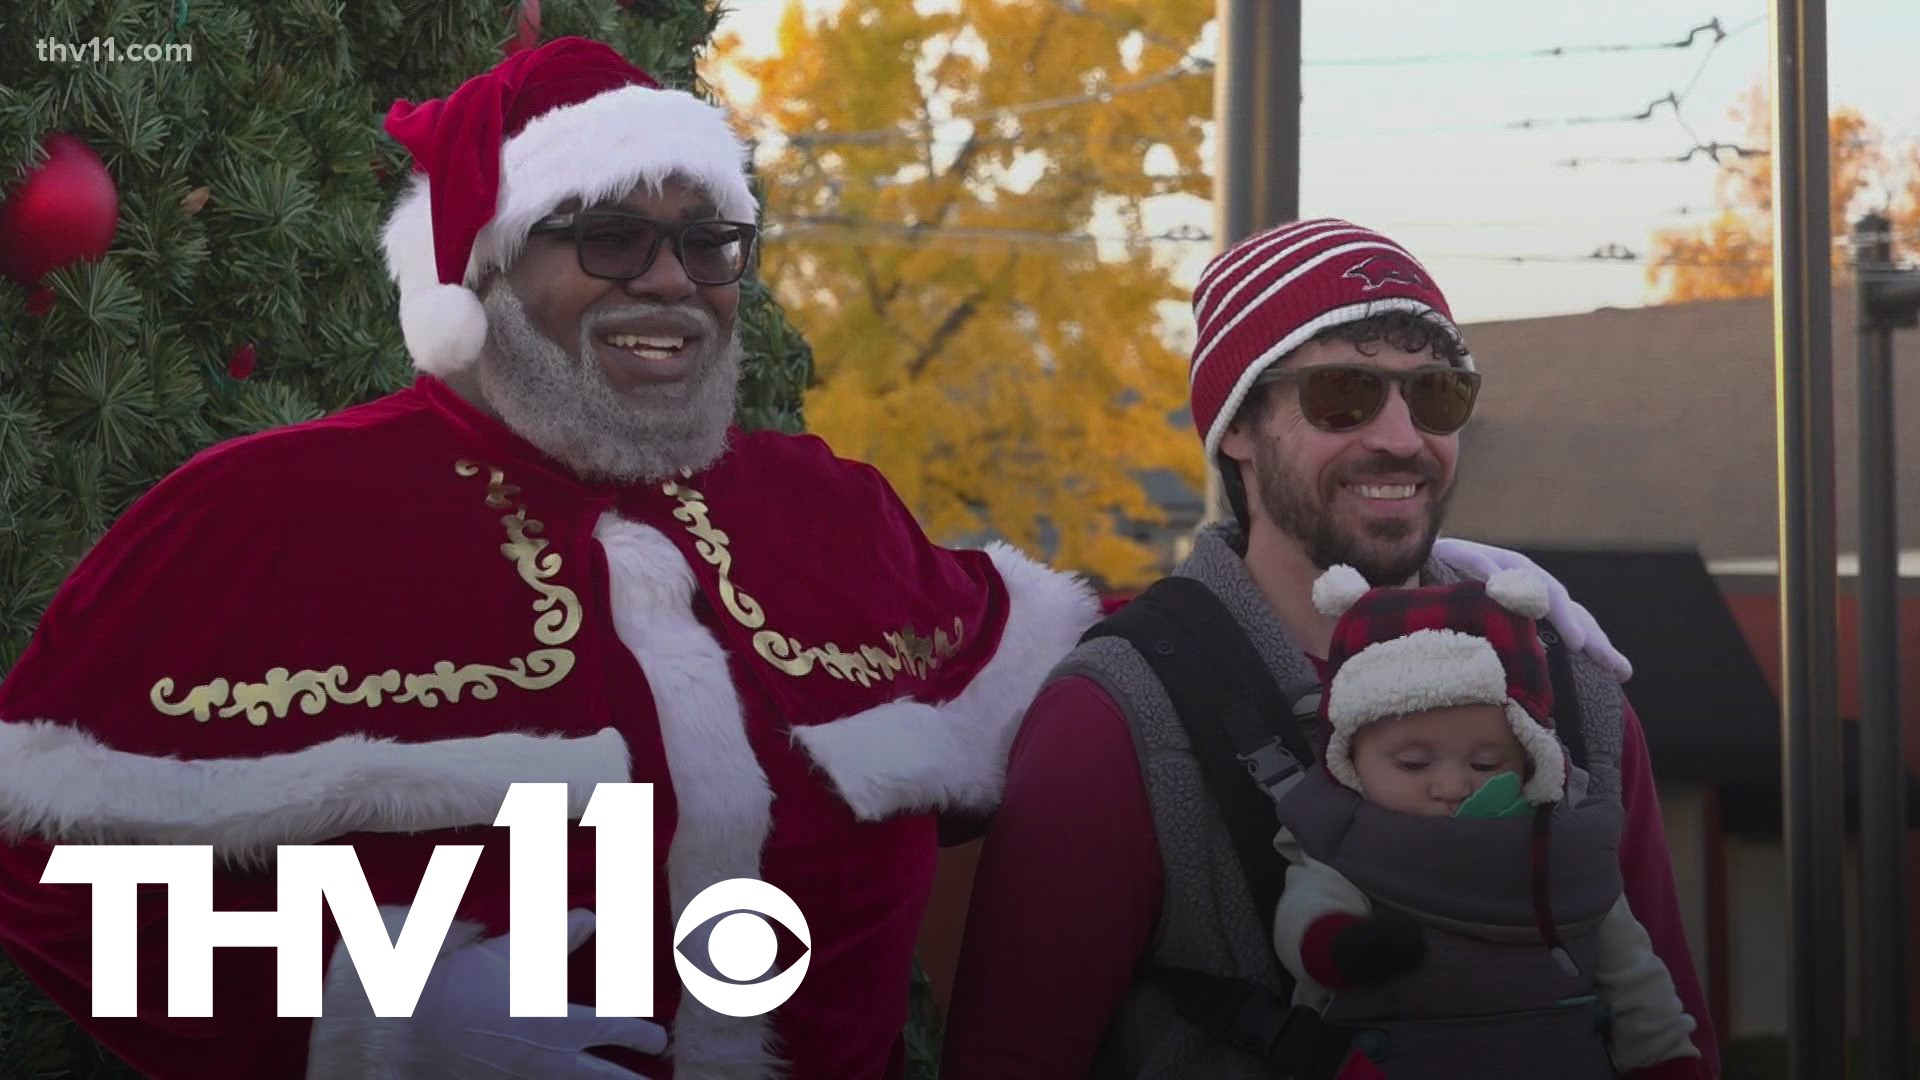 It's holiday season, which means that Santa's visiting different areas, including North Little Rock.